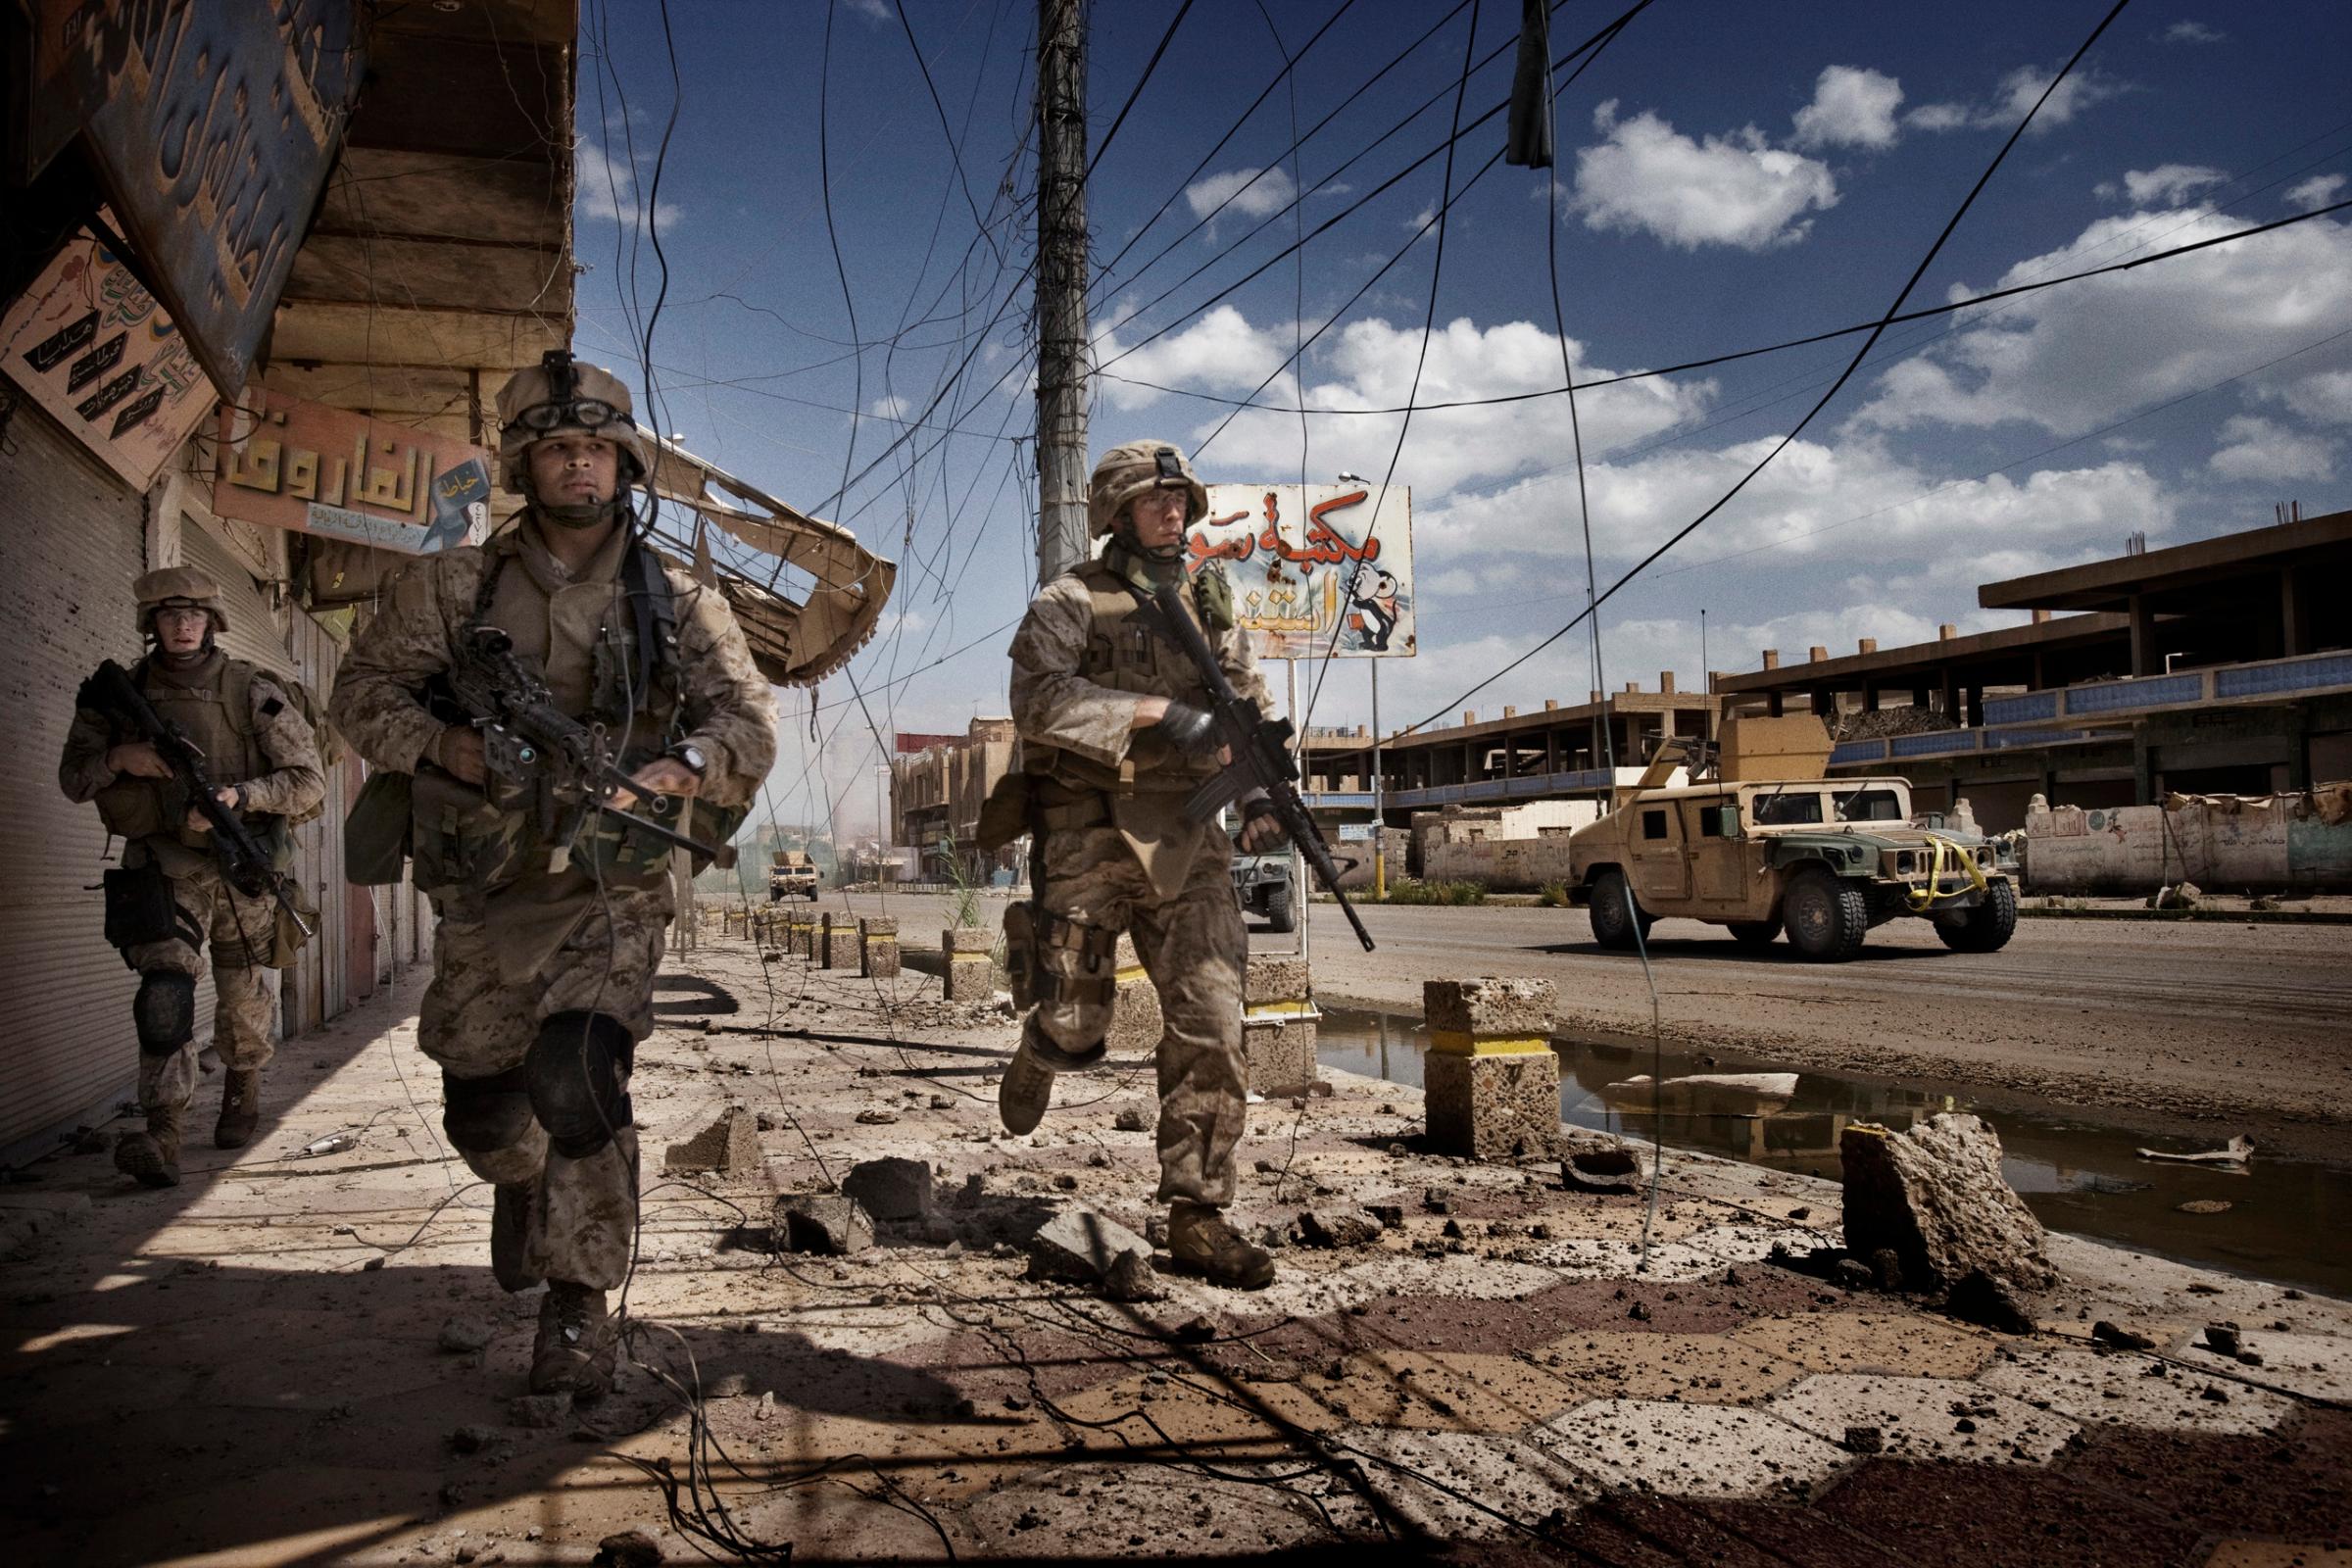 U.S. Marines from the 3rd Battalion, 8th Marine Regiment, Kilo company scan streets and surrounding buildings for insurgents during a patrol in Ramadi, Iraq, April 27, 2006.